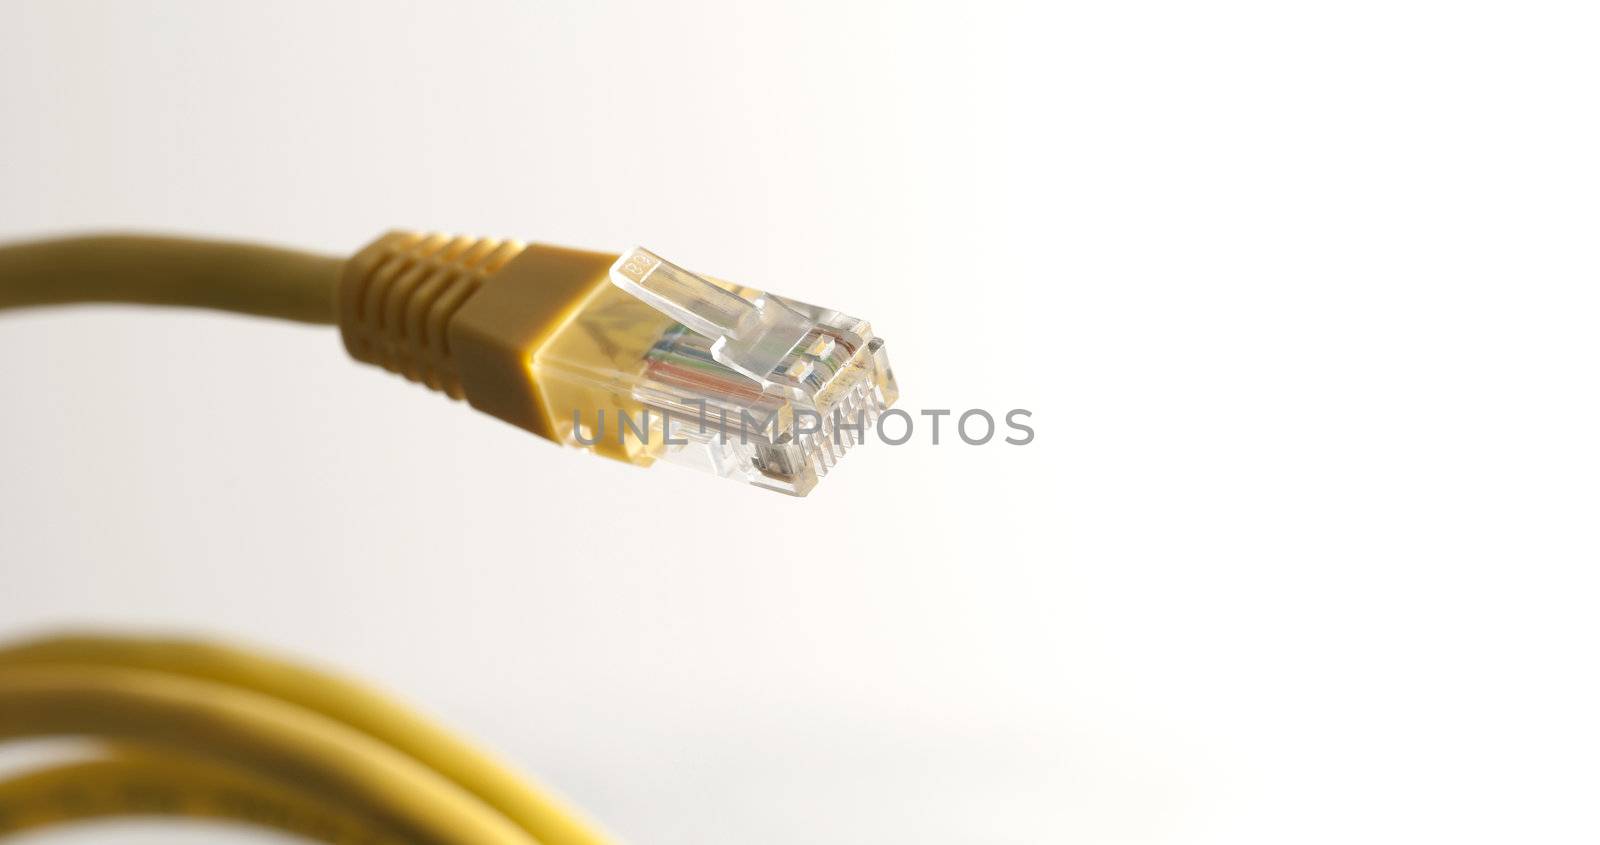 Category 5 cable (Cat 5) is a twisted pair cable for carrying signals. This type of cable is used in structured cabling for computer networks such as Ethernet.